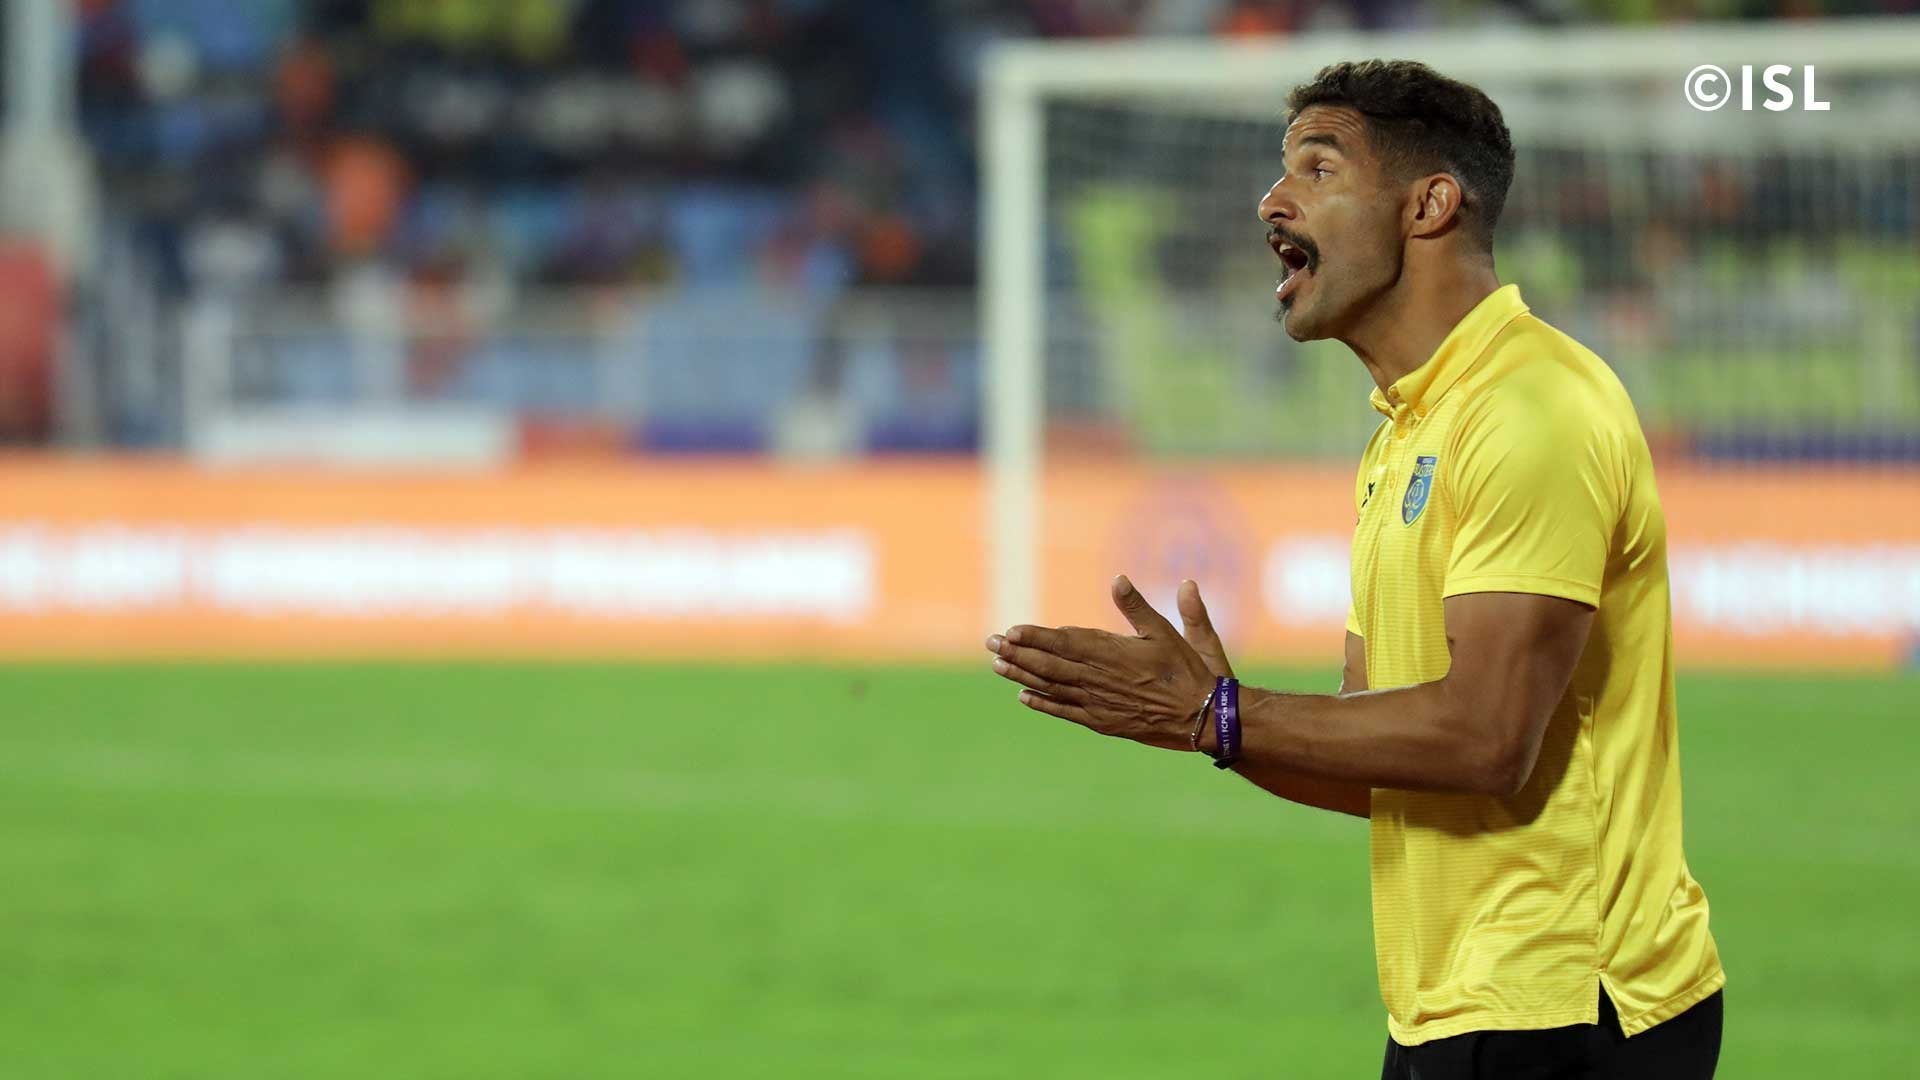 Indian footballers need more competitive matches to develop skills, opines David James